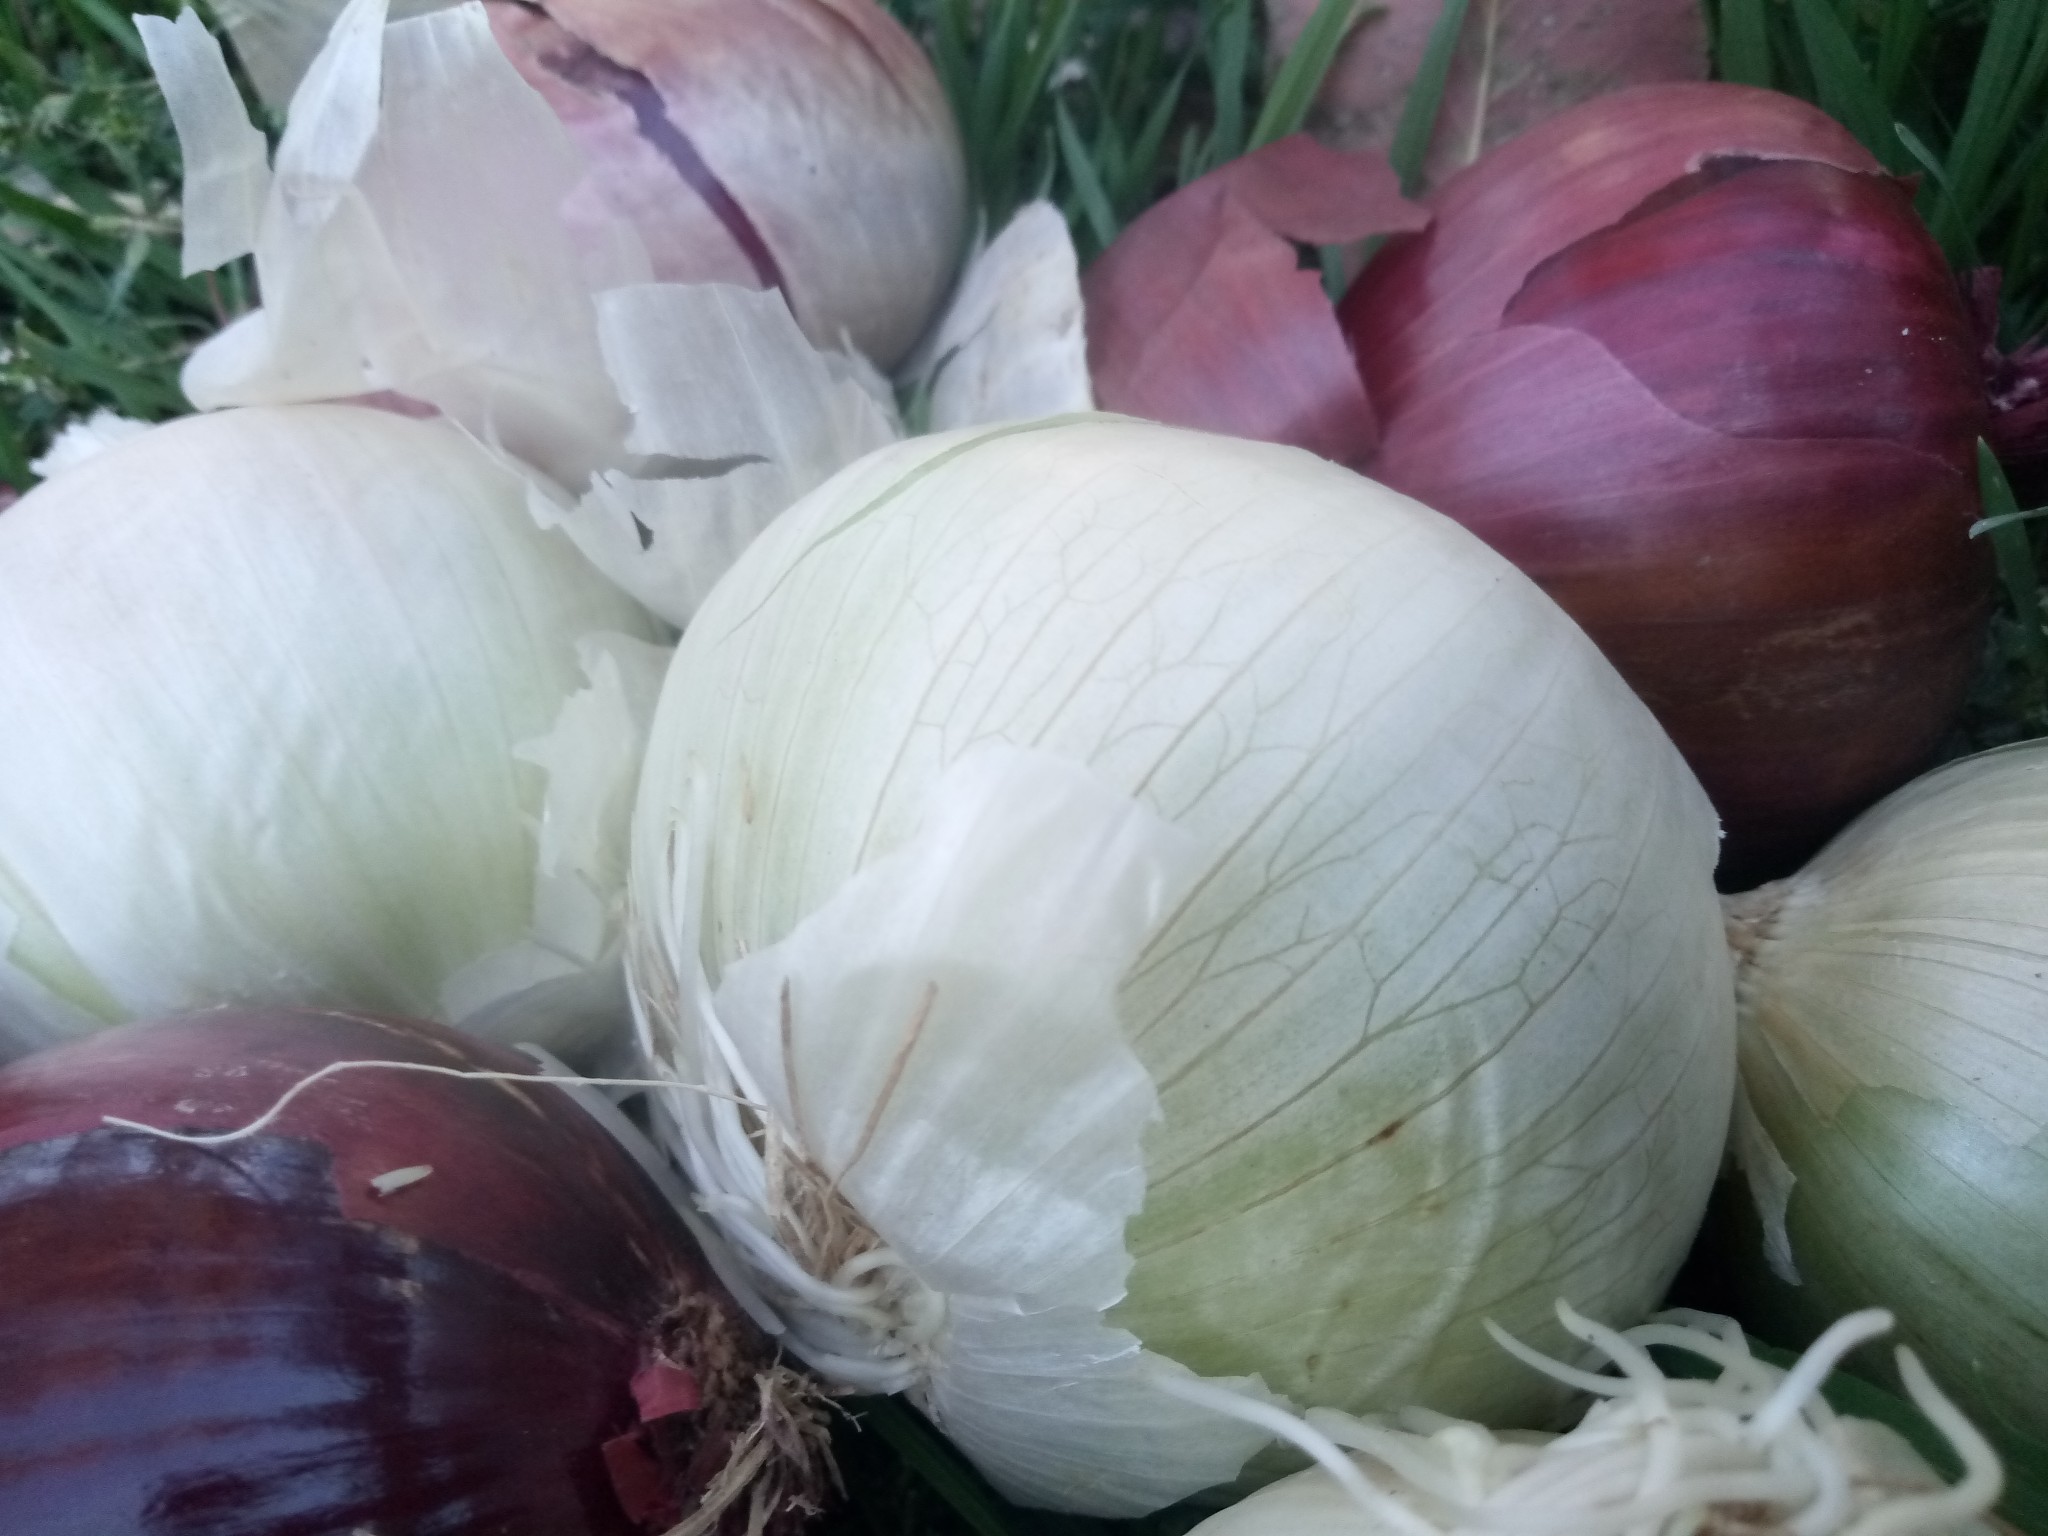 Red and white onion photo 